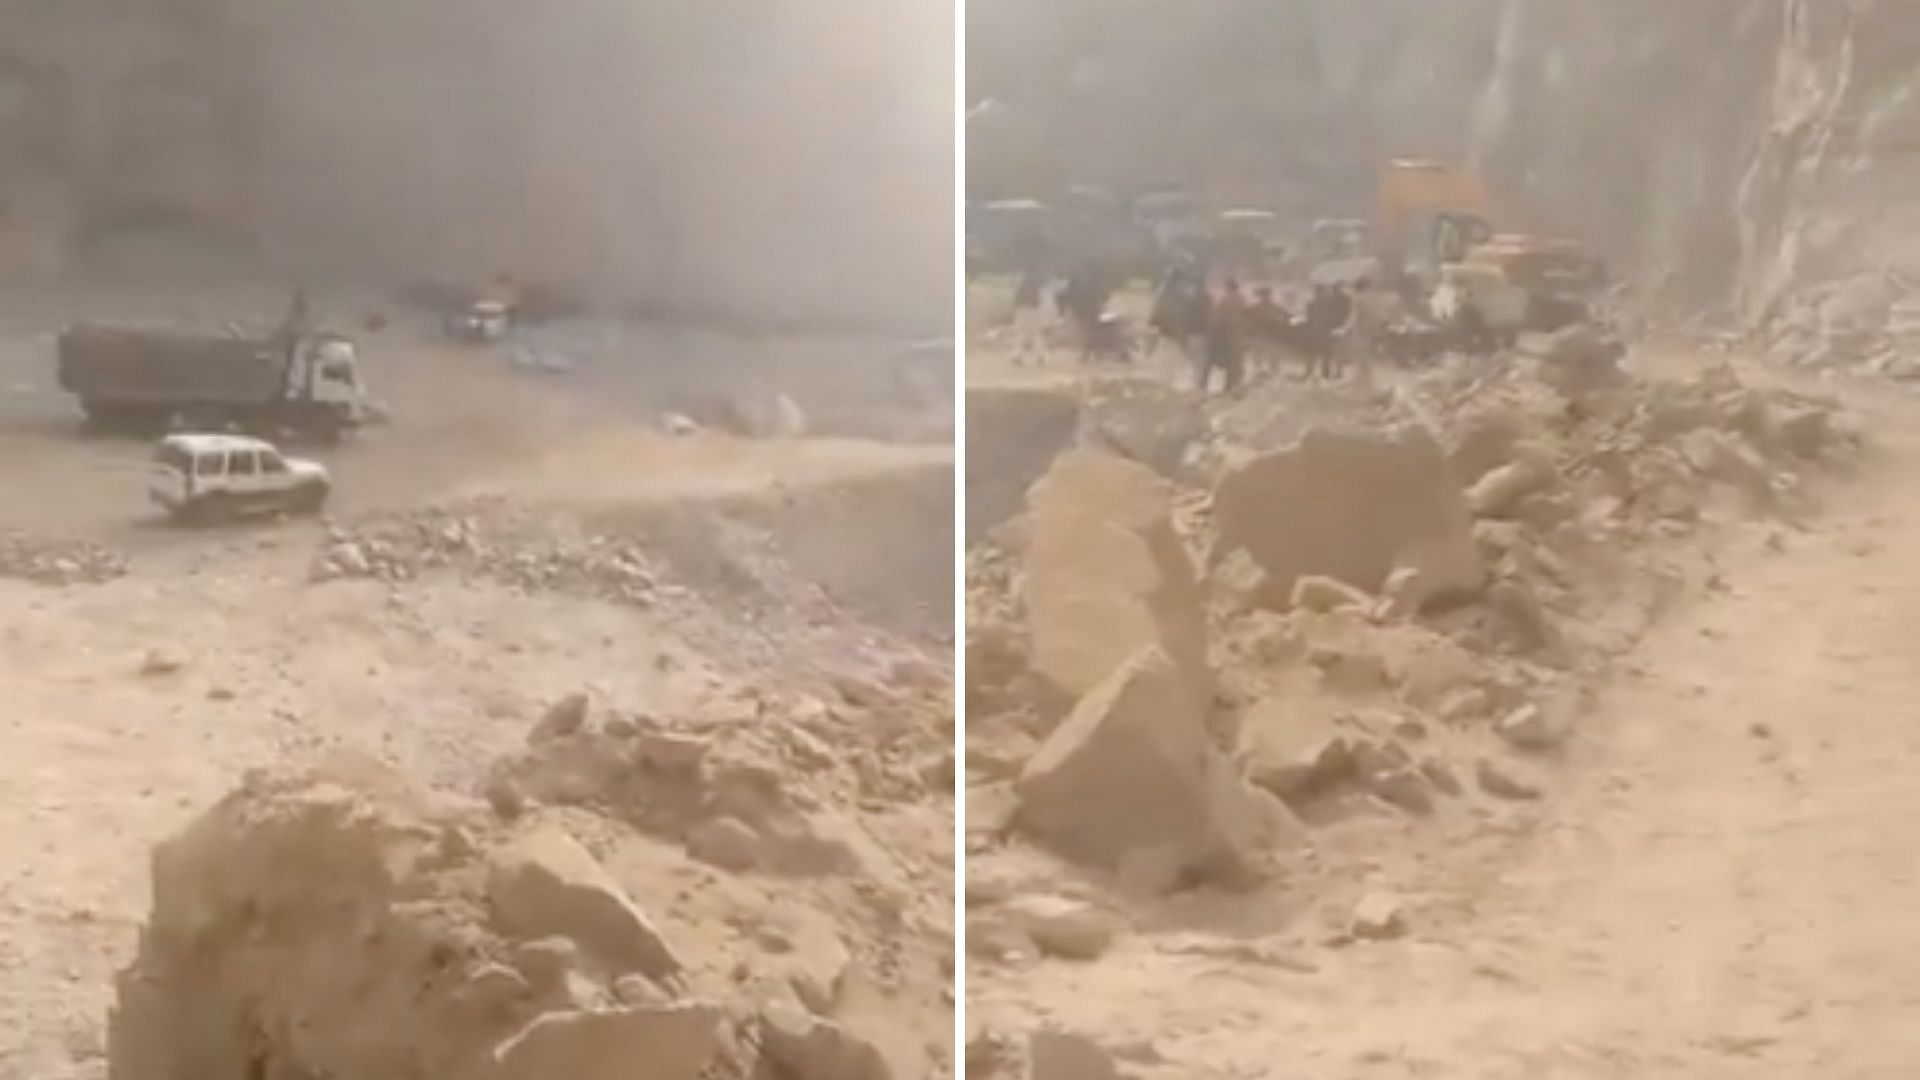 <div class="paragraphs"><p>Yet another body has been recovered from the debris of the mining site at Haryana's Bhiwani, where four people were killed following a <a href="https://www.thequint.com/news/india/landslide-in-mining-quarry-in-haryana#read-more">landslide</a> on Saturday, 1 January. With this, the total deaths caused by the accident has gone up to 5.</p></div>